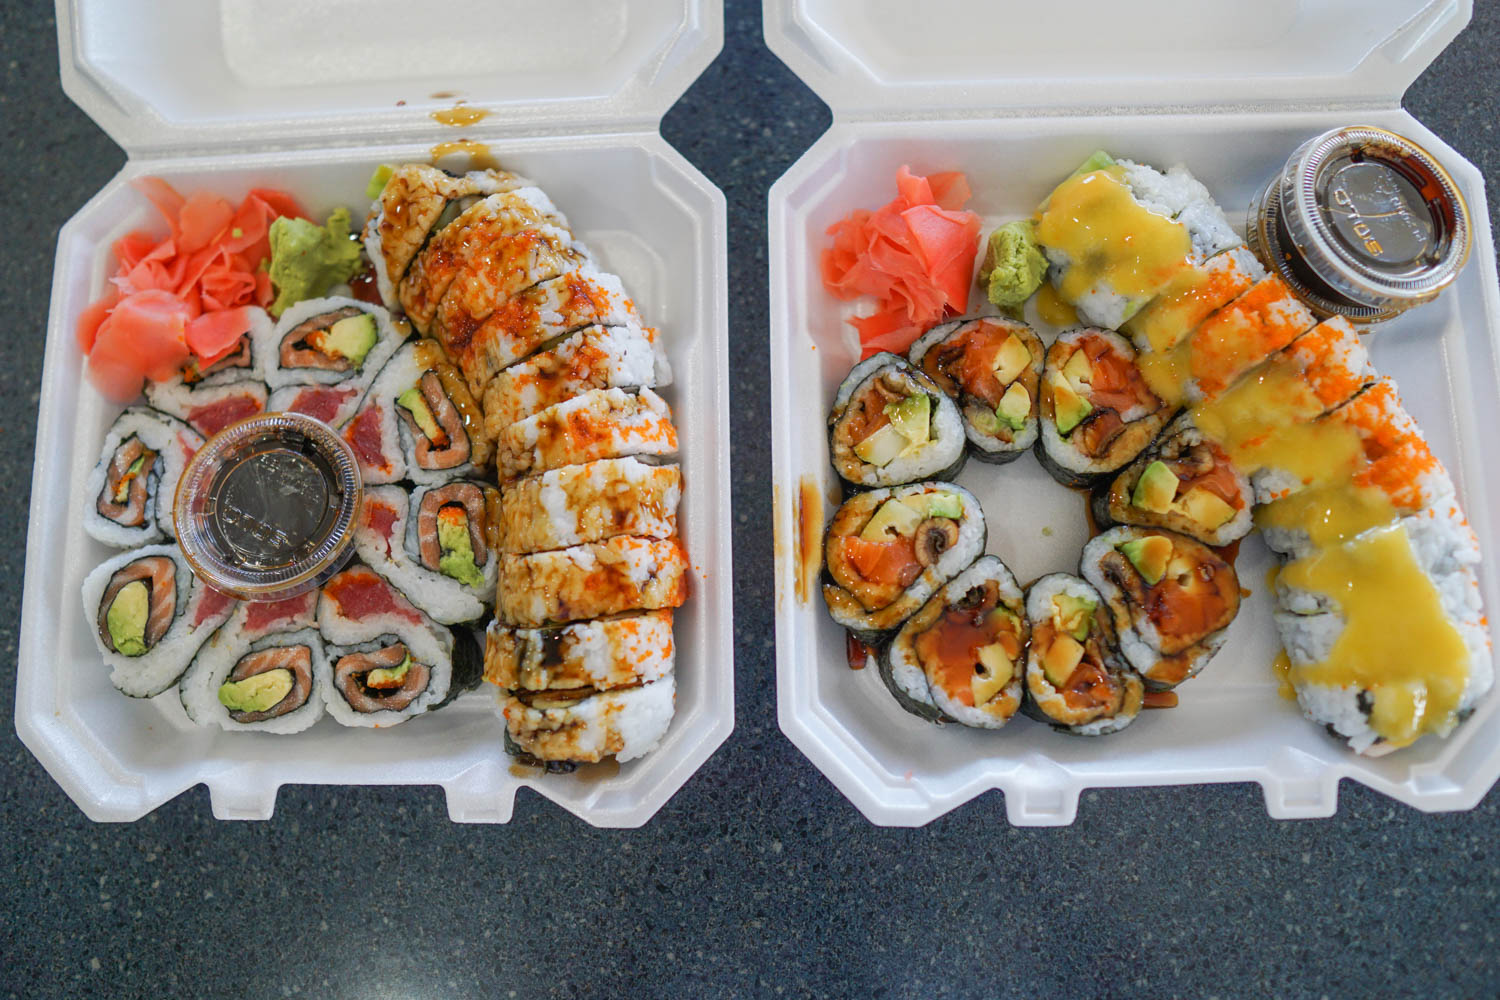 Sushi from Andy's in Wholey's